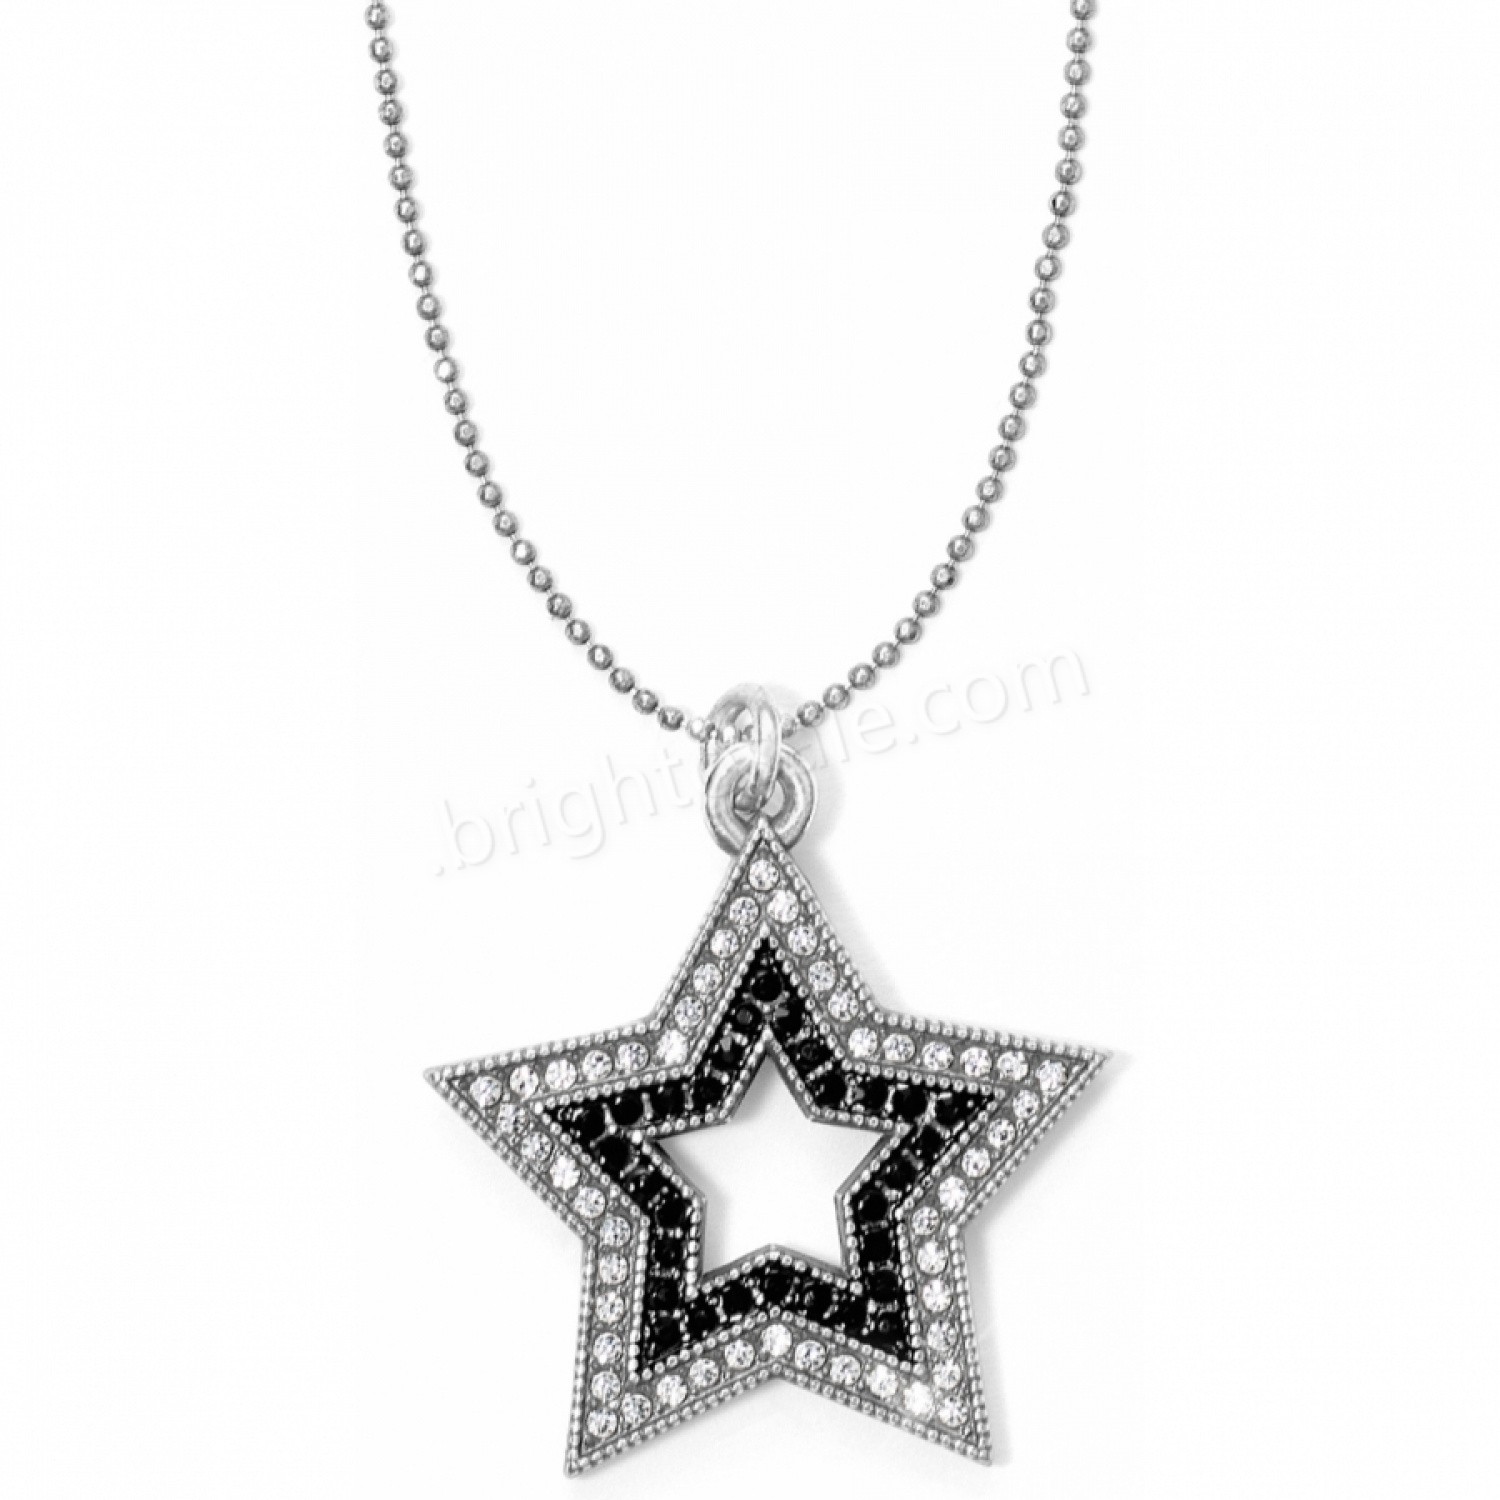 Brighton Collectibles & Online Discount Twinkle Nights Star Necklace - Brighton Collectibles & Online Discount Twinkle Nights Star Necklace